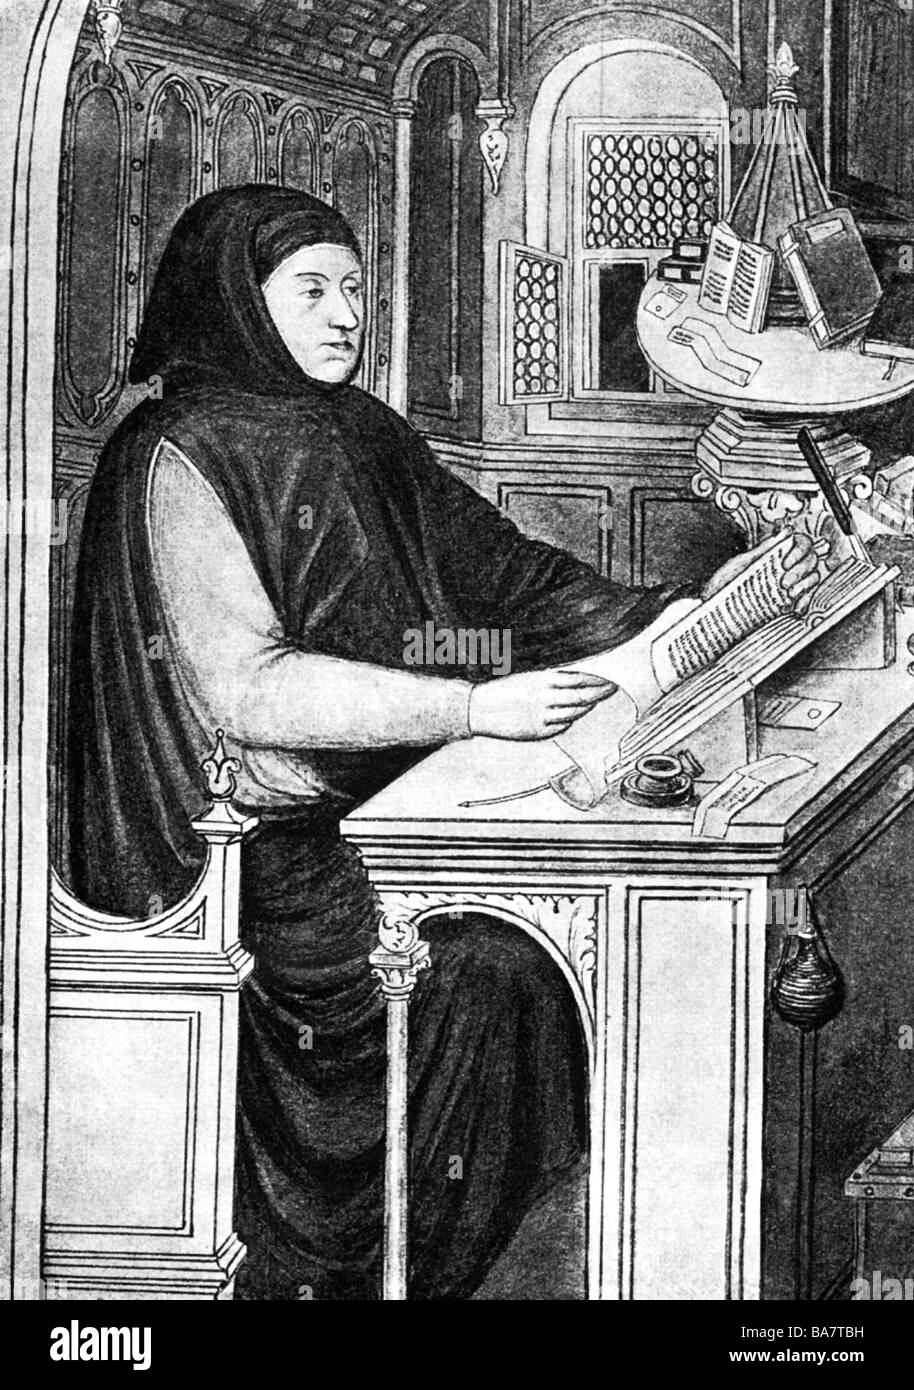 Petrarca, Francesco, 20.7.1304 - 19.7.1374, Italian humanist and author / writer, half length, working, after miniature, late 14th century, Stock Photo